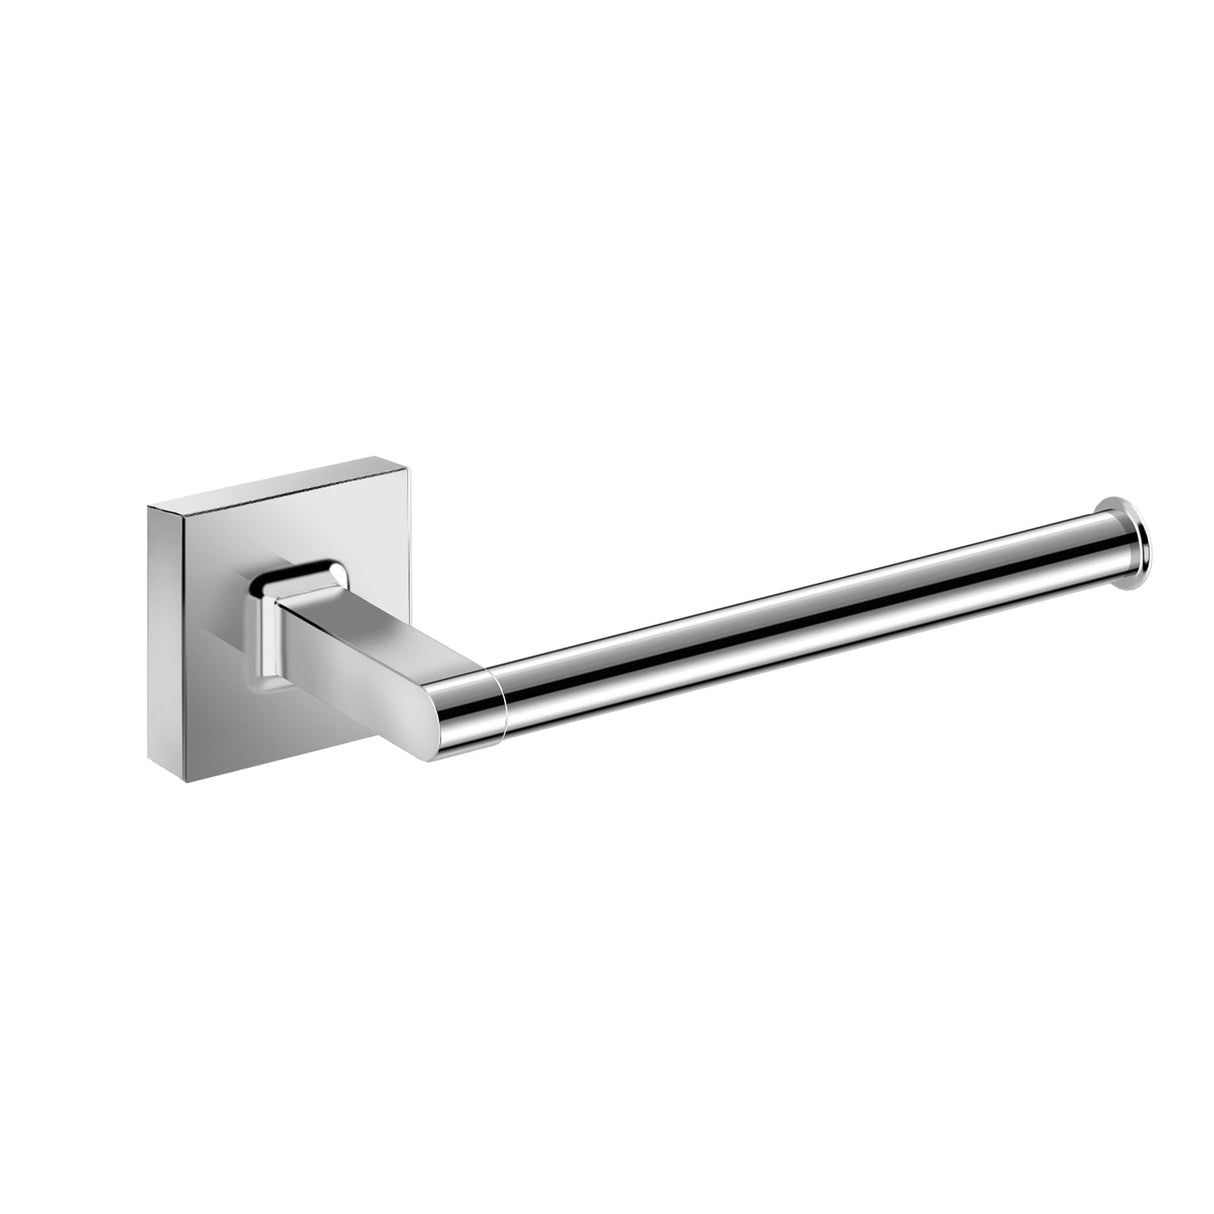 DAX Milan Brass Toilet Paper Holder Right Opening Square Line, Chrome DAX-GDC160156-CR